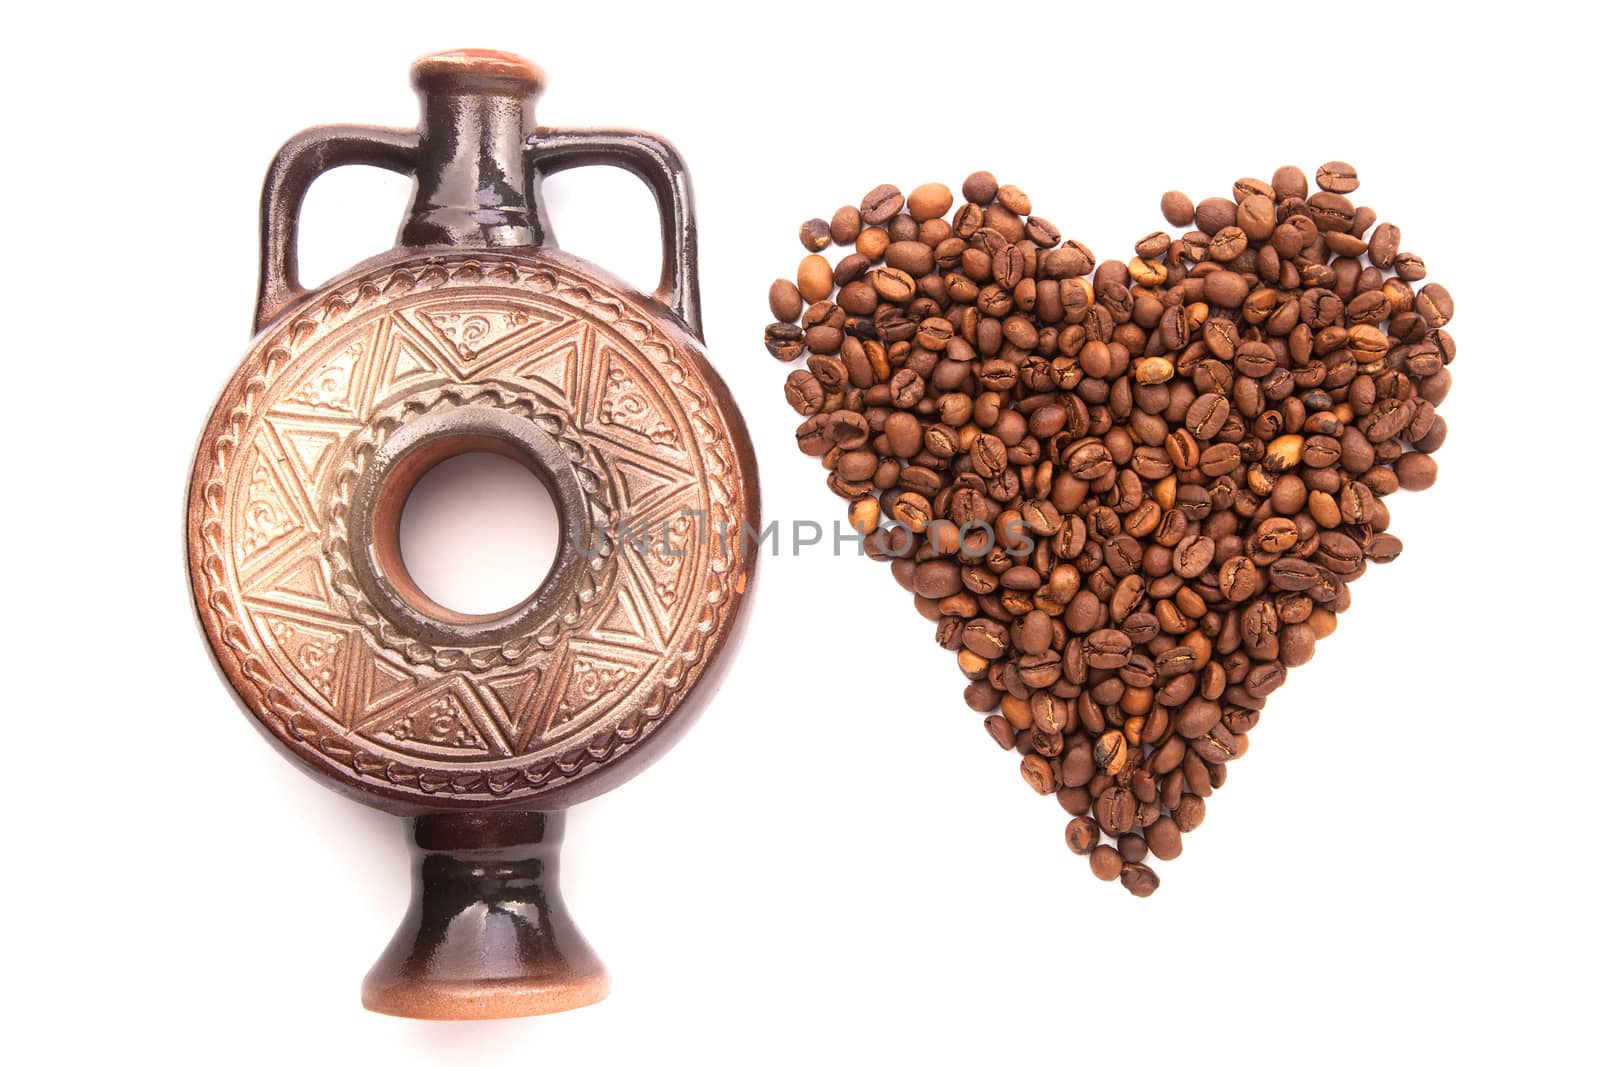 bow tie patterned sea anchor lie on the circle of coffee beans isolated on white background